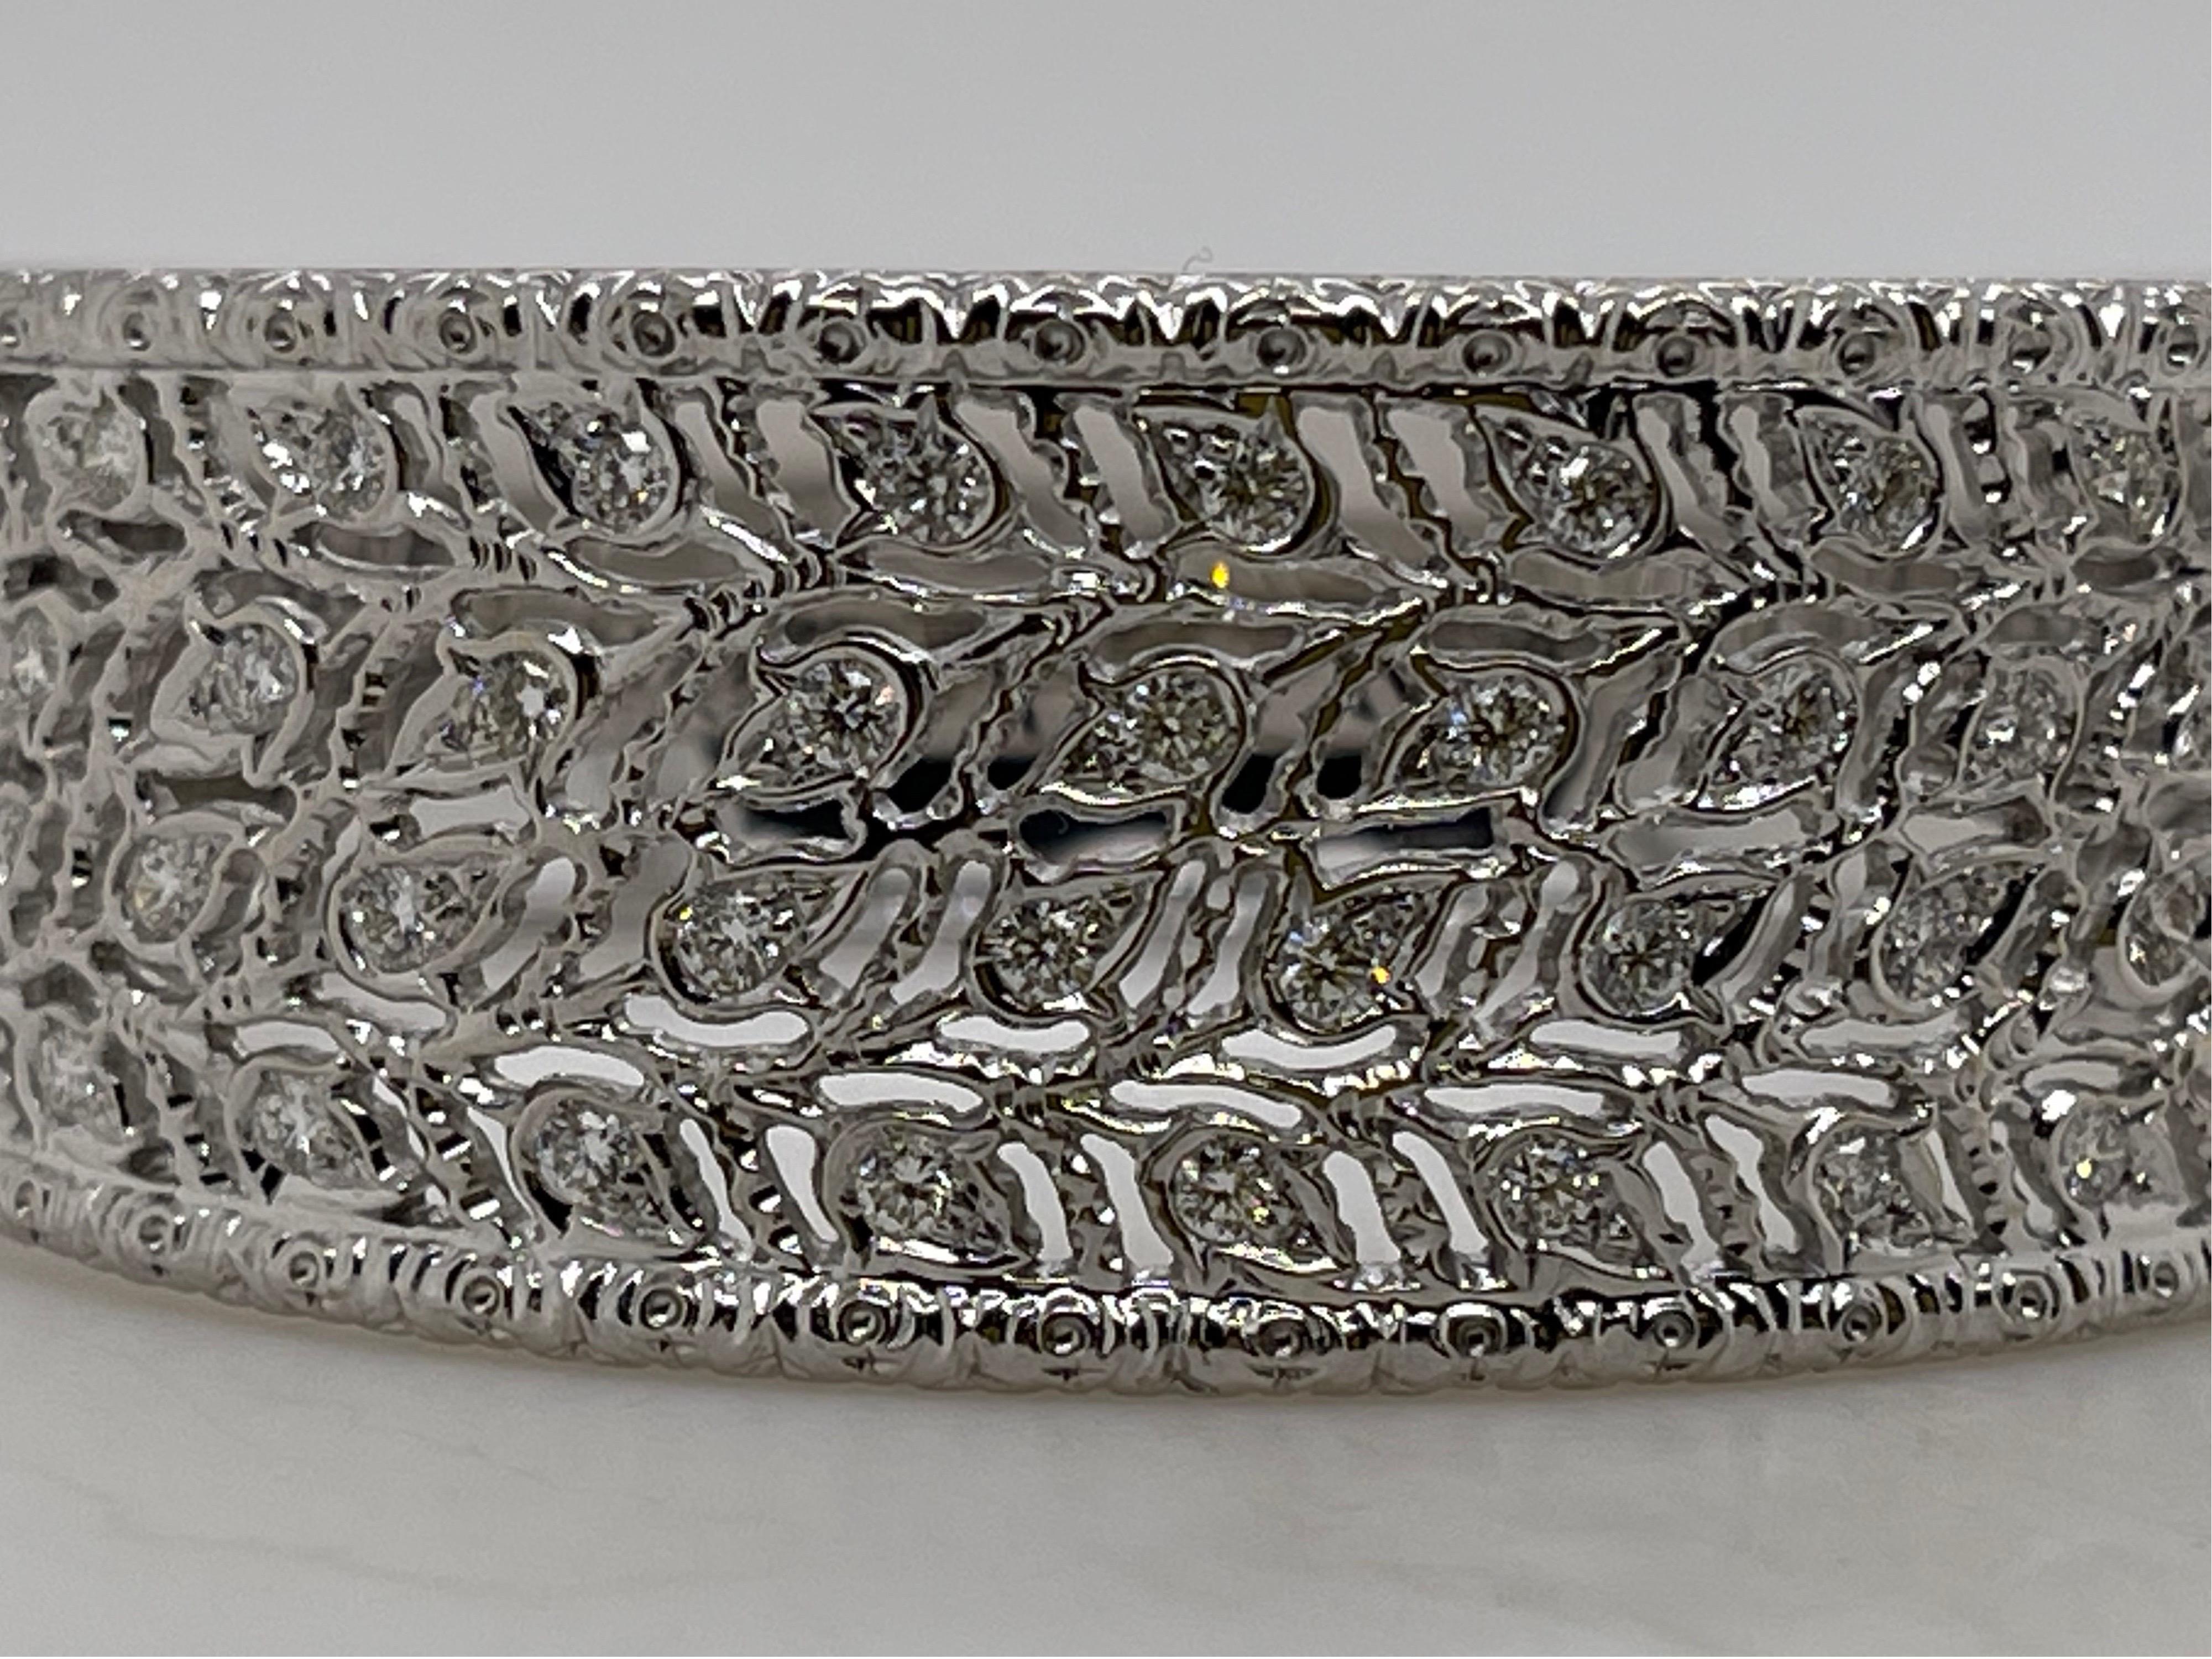 Brushed White Gold & Round Diamond Leaf Hinged Cuff For Sale 2